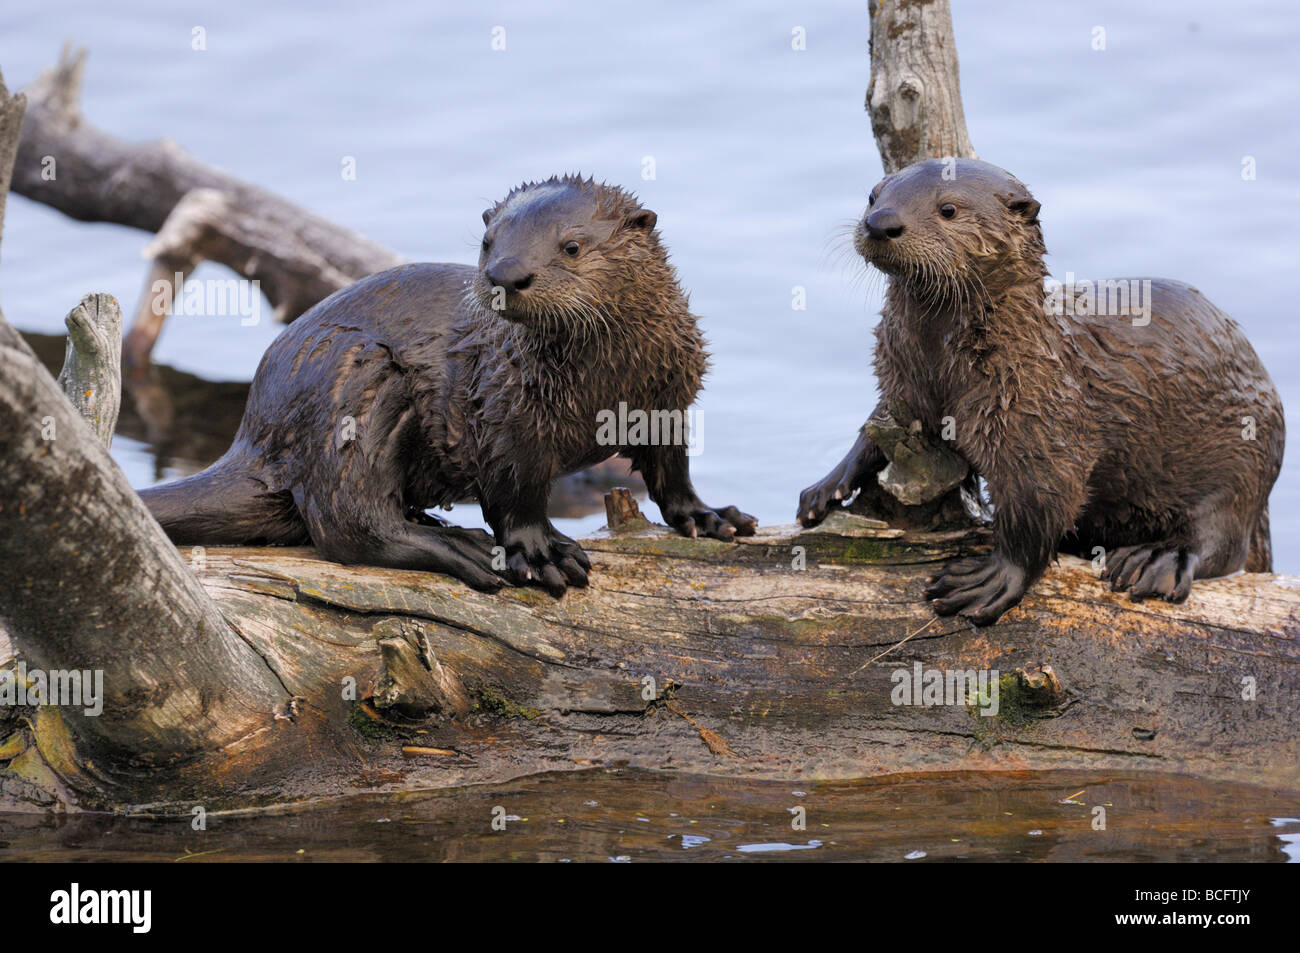 Stock photo of two river otter pups sitting together on a log, Yellowstone National Park, 2009. Stock Photo